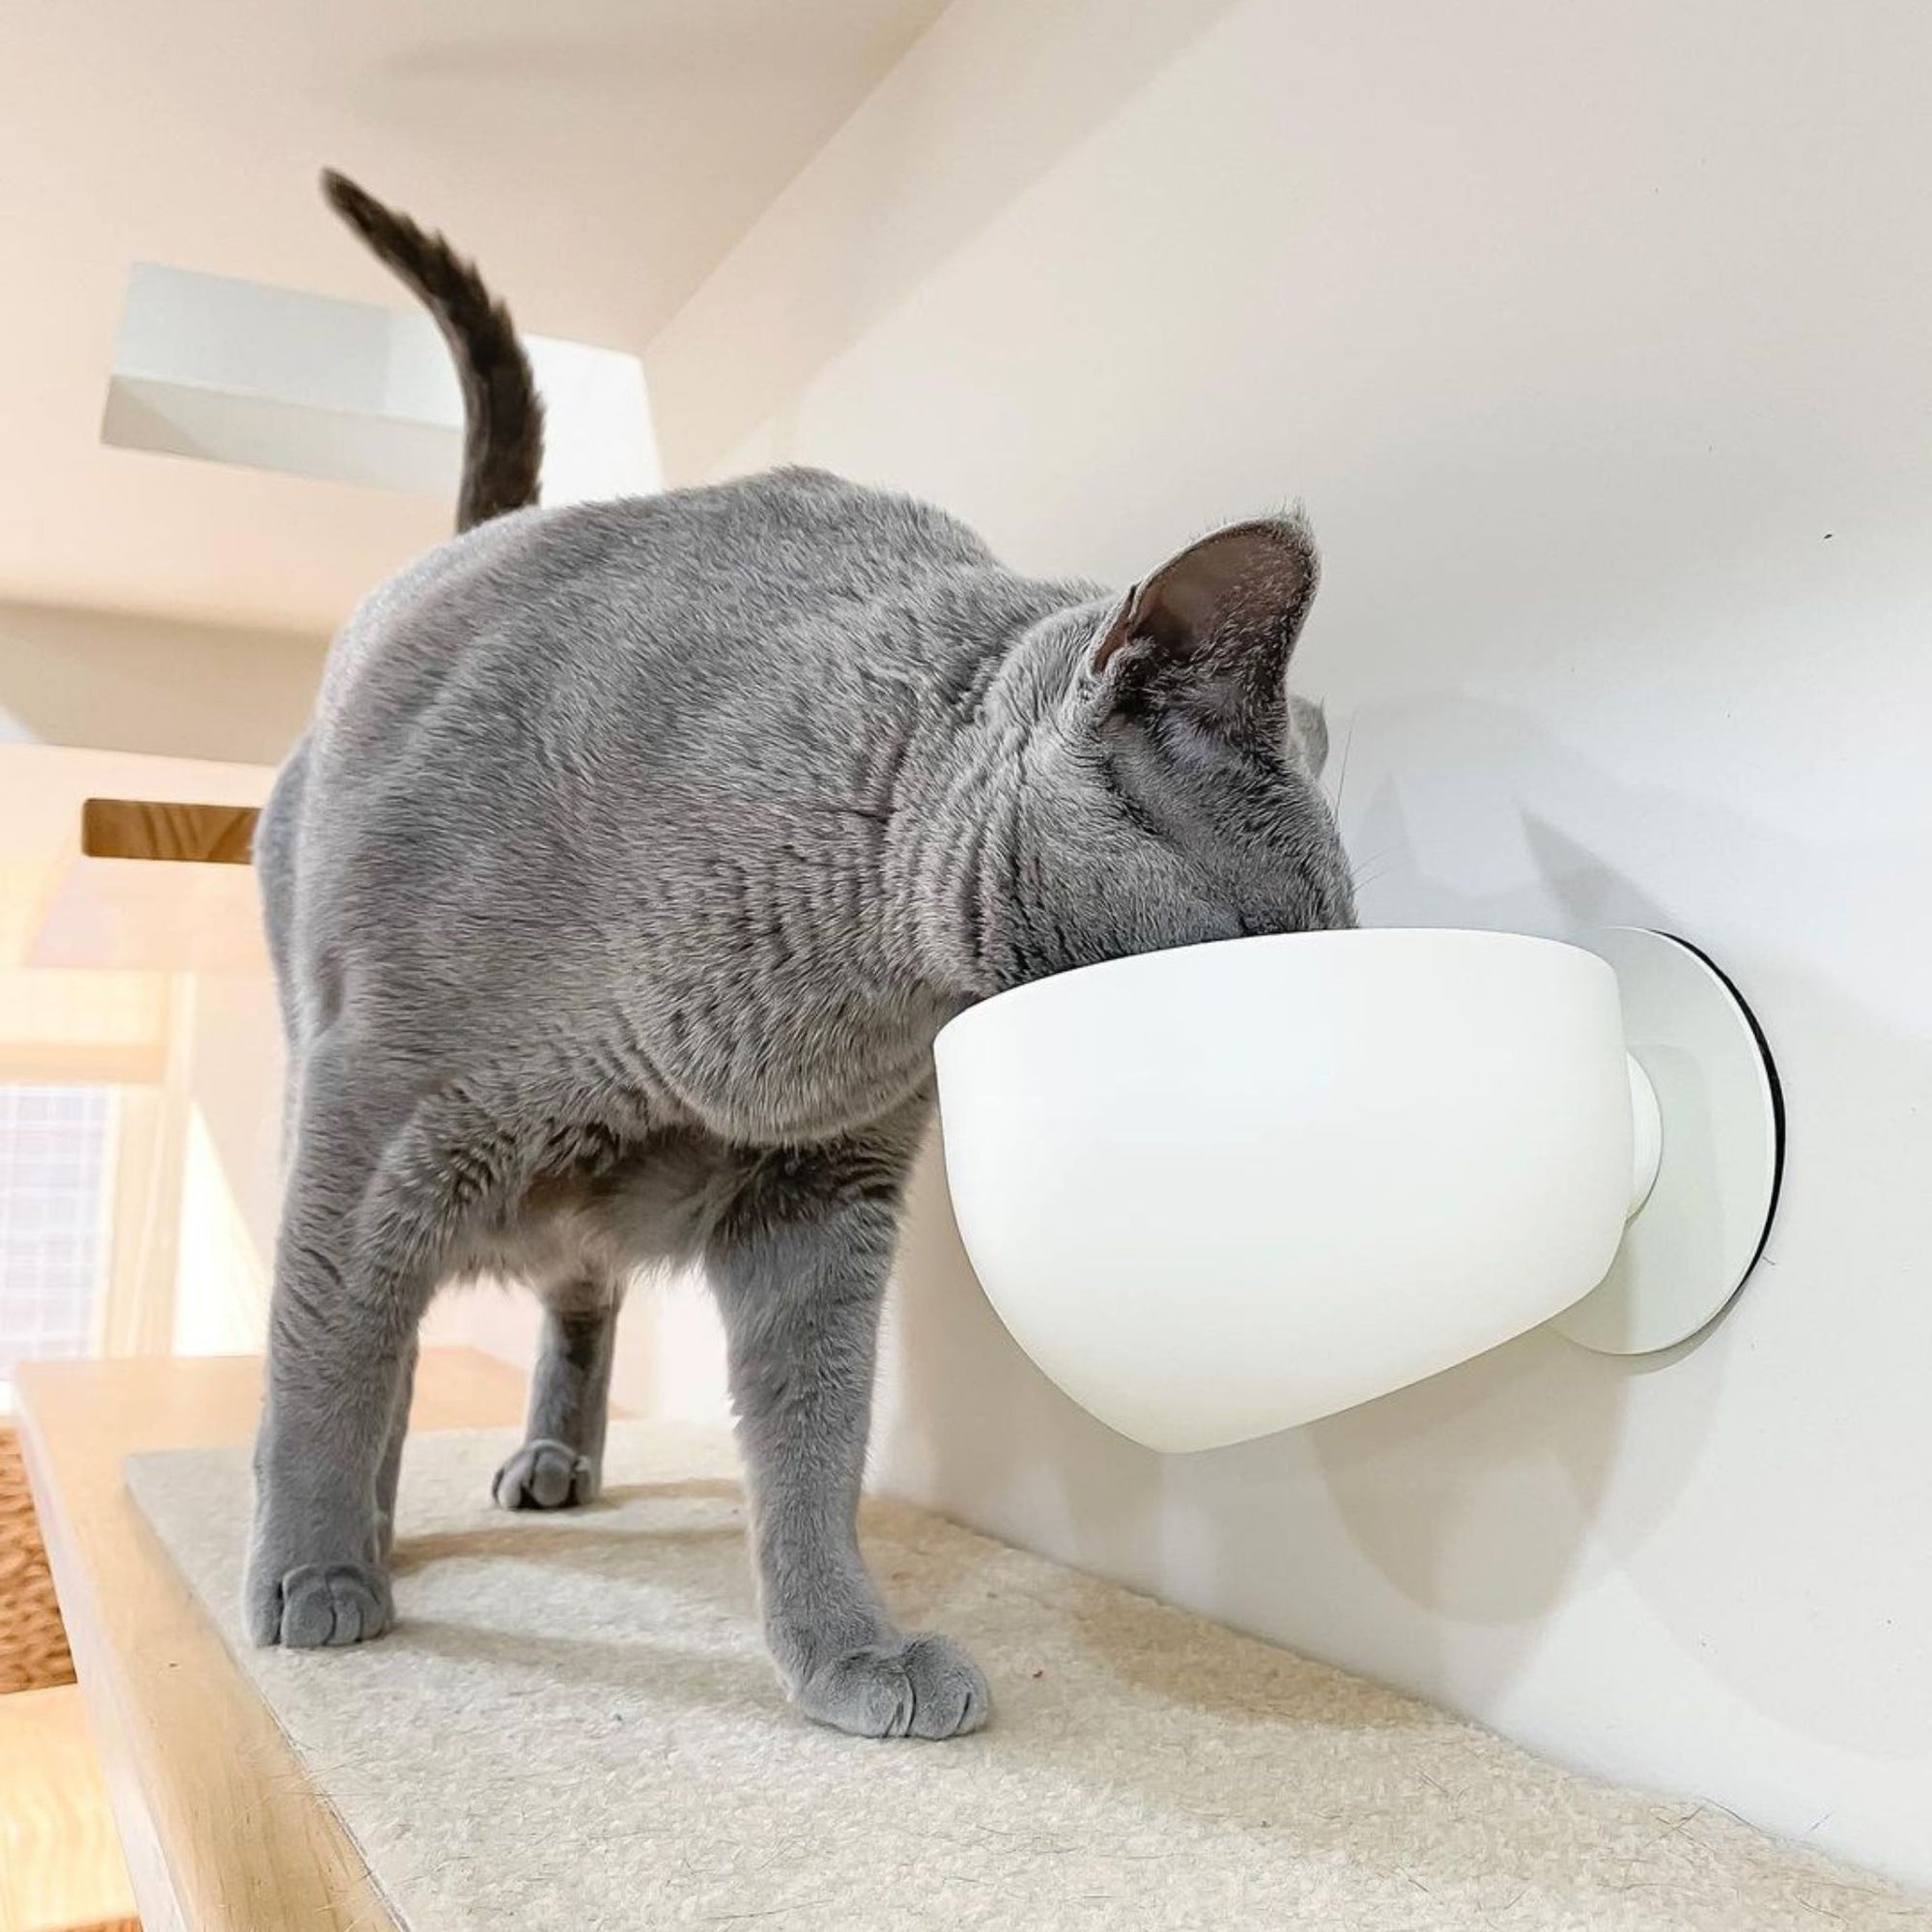 Your kitty will love the self-magnetic portable sticky cat bowl!